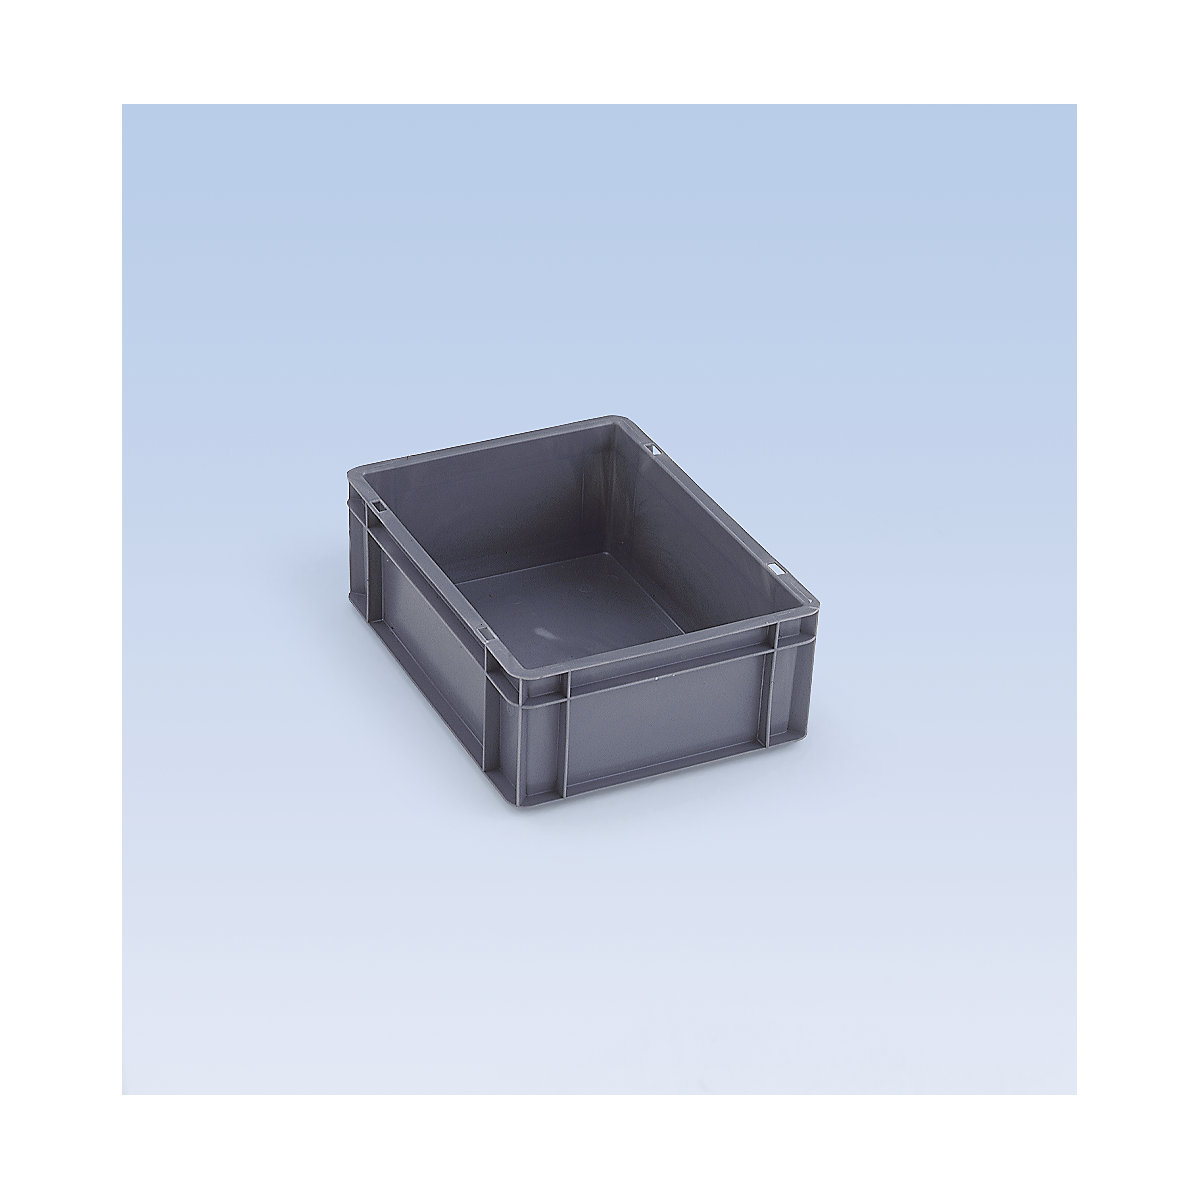 Euro stacking container, closed walls and base, LxWxH 600 x 400 x 75 mm, grey, pack of 5-1